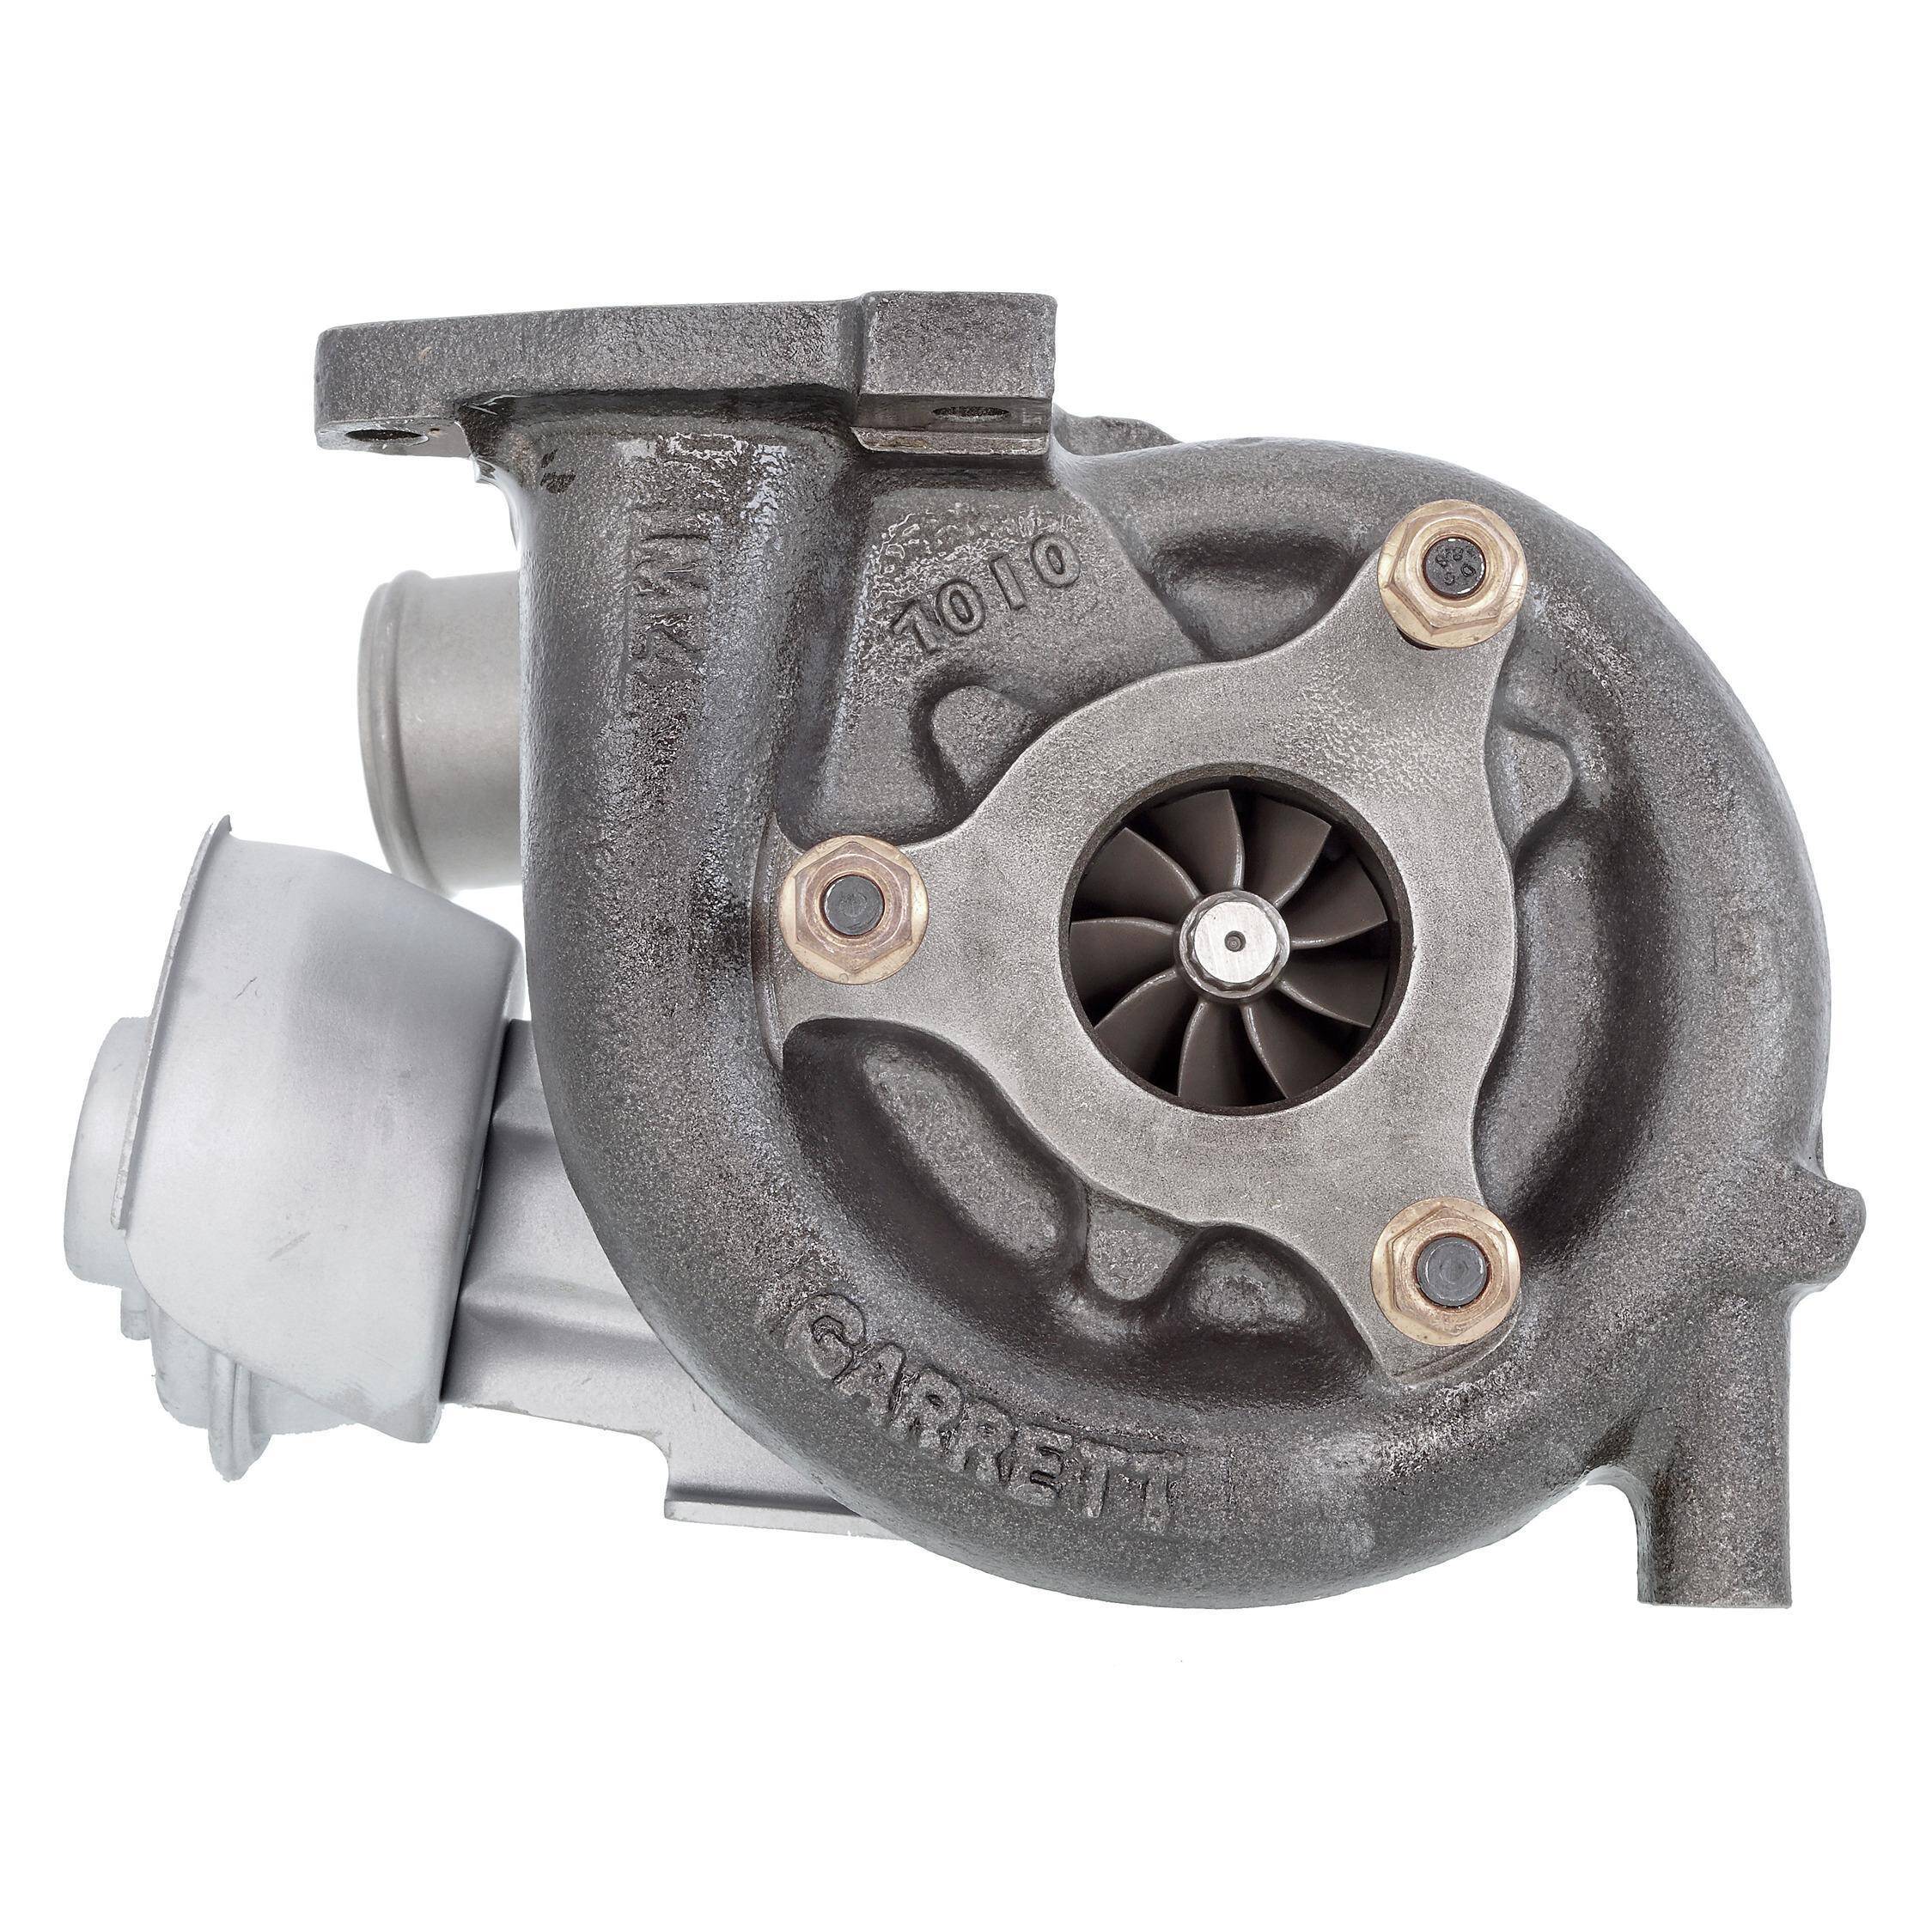 TURBOCHARGER TURBO REMANUFACTURED 724639-5006S 724639-5006S